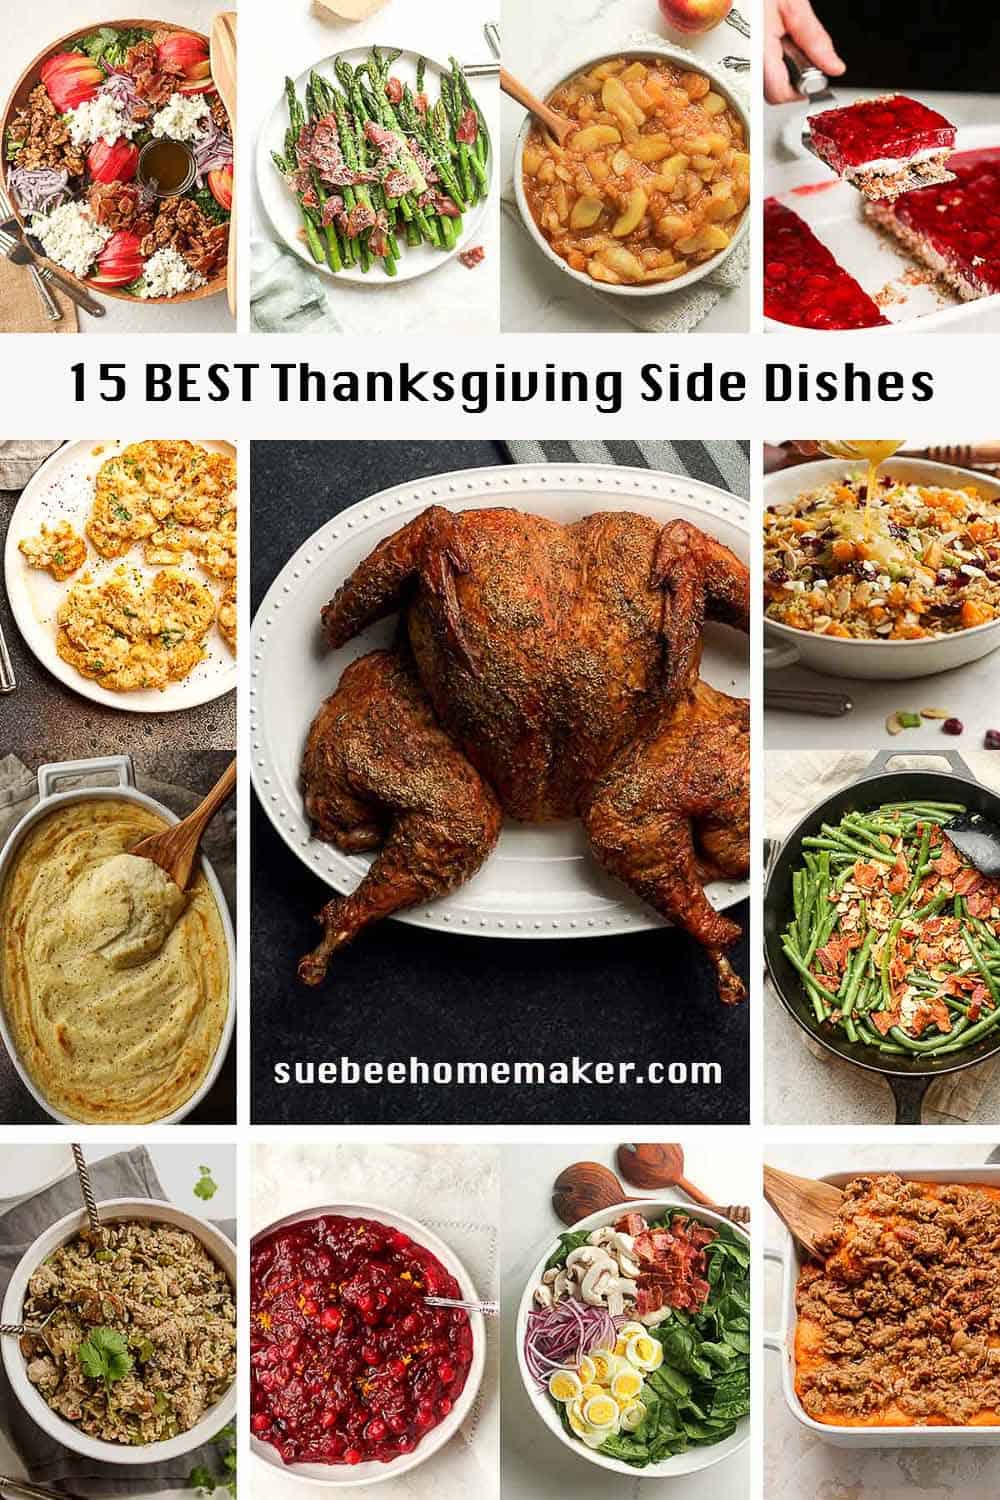 15 BEST Thanksgiving Side Dishes!